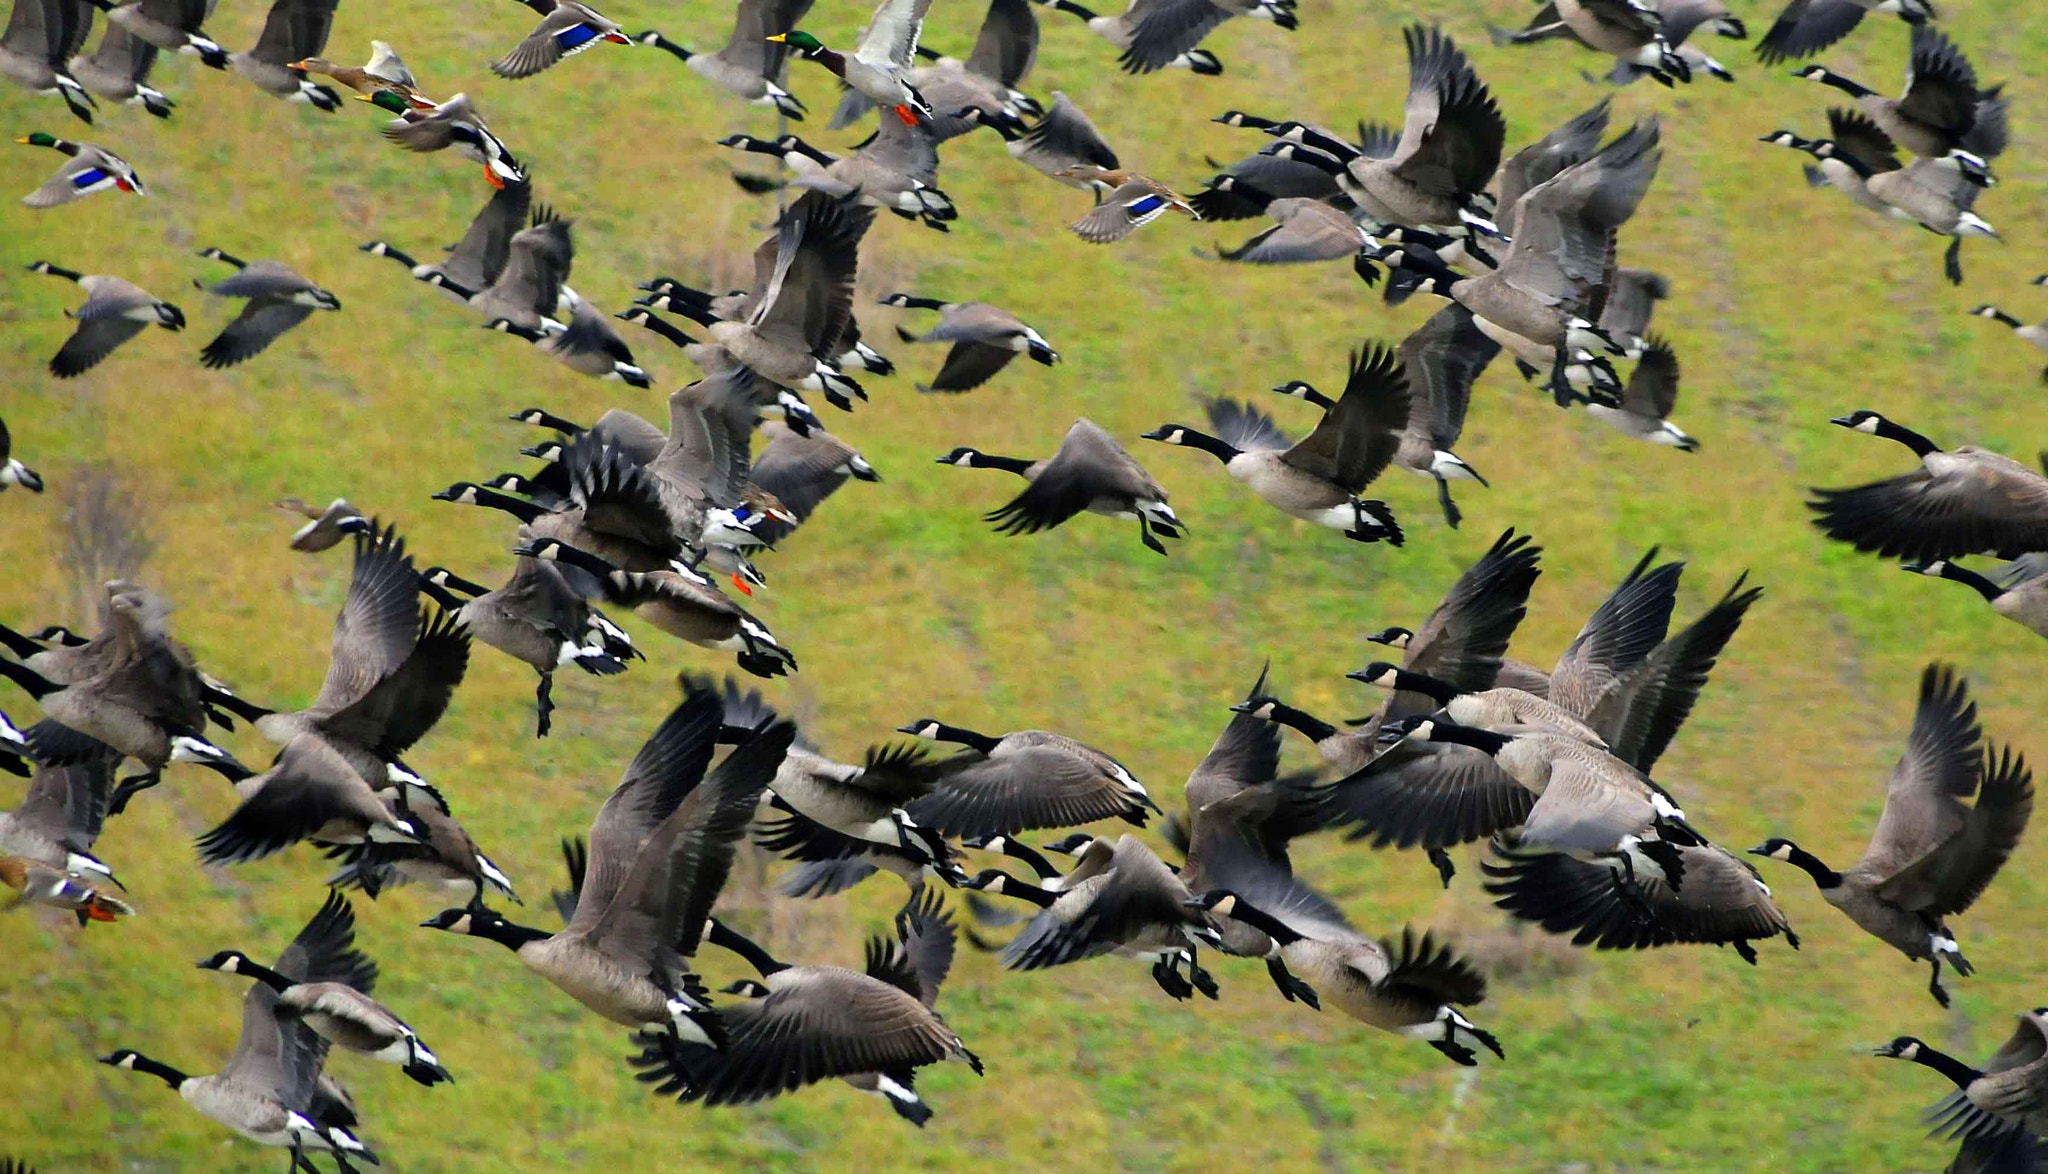 Nikon D300 + Tamron AF 18-270mm F3.5-6.3 Di II VC LD Aspherical (IF) MACRO sample photo. Just passing through! canada geese migration. photography